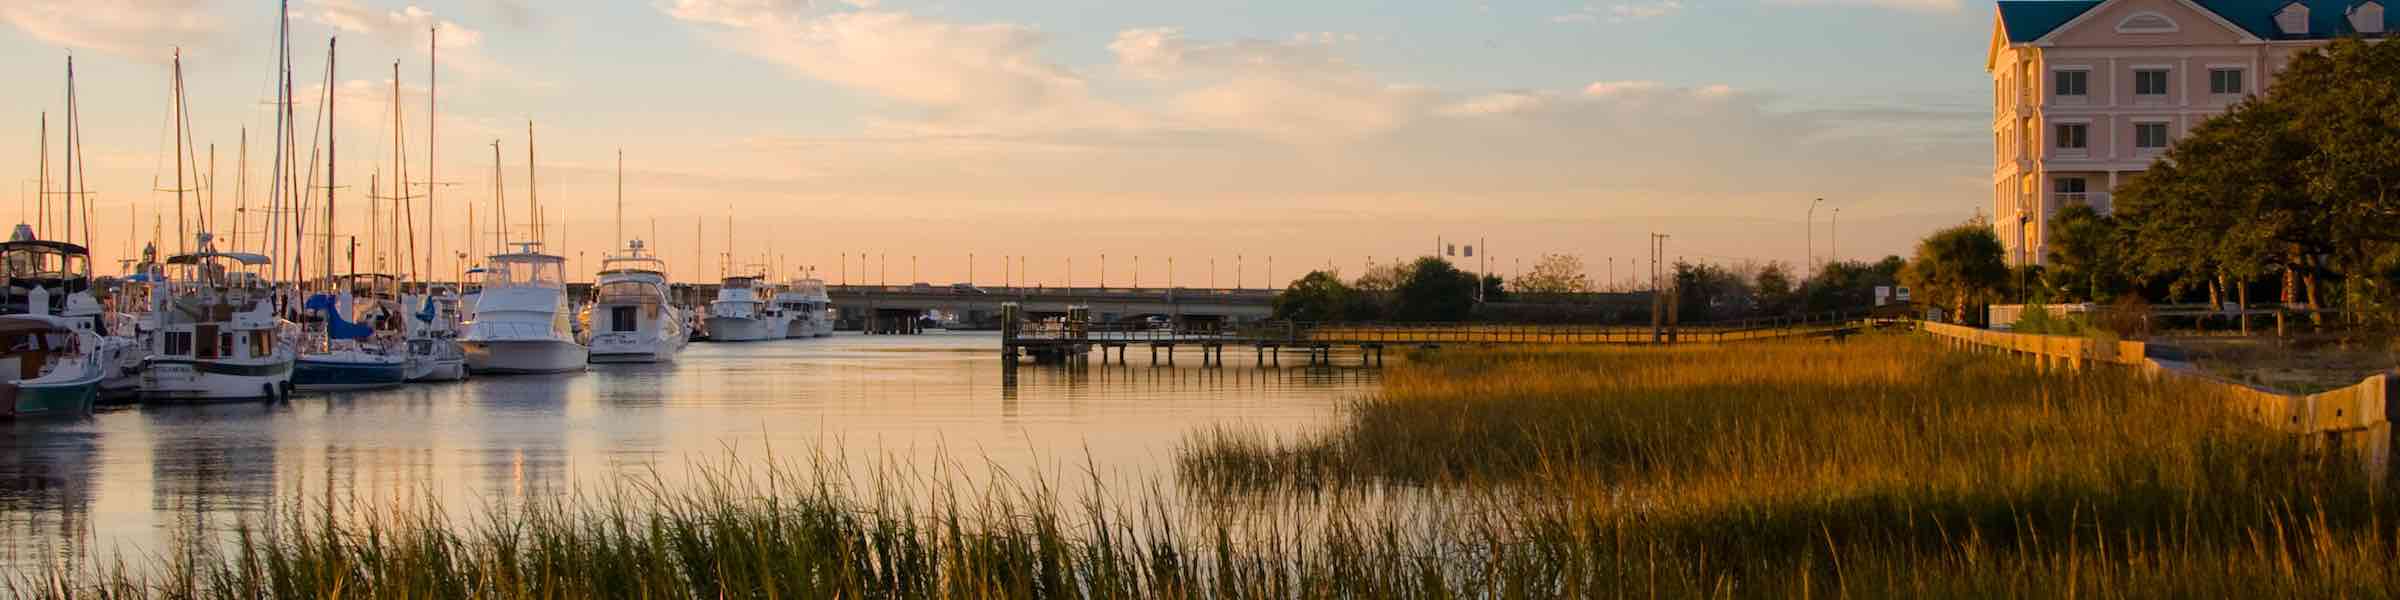 Evening view of the Charleston Marina in fall